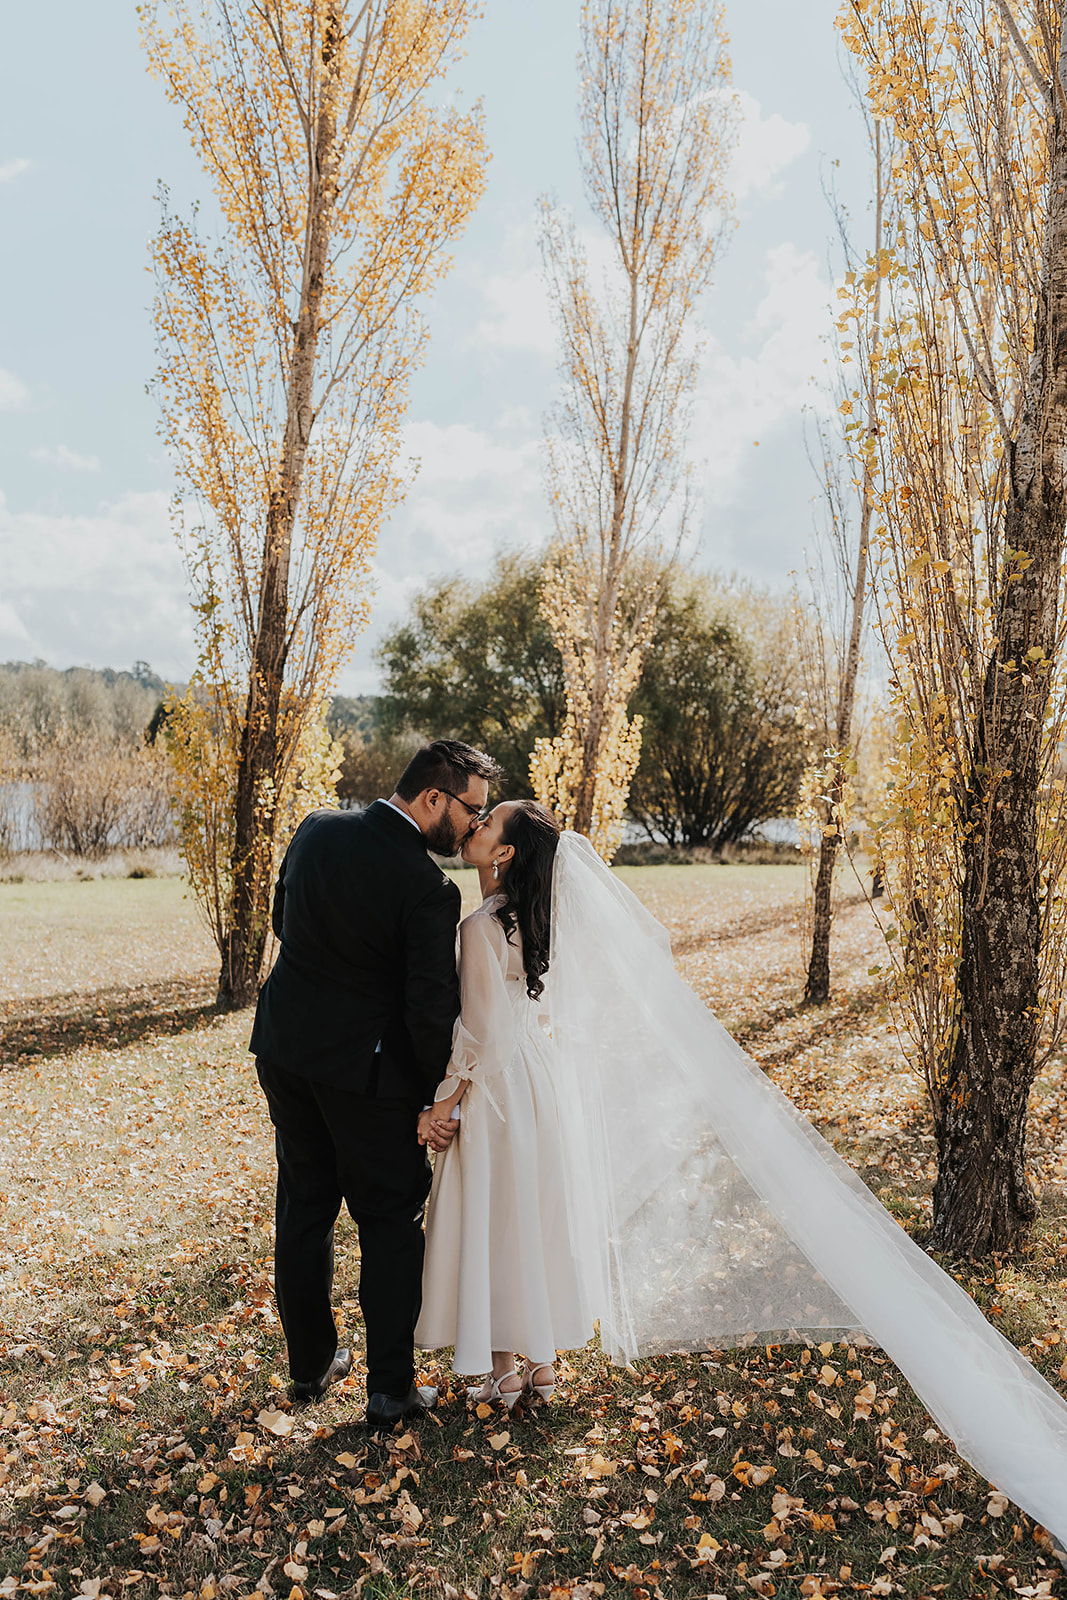 The married couple shares a kiss underneath the golden autumn trees in Daylesford.